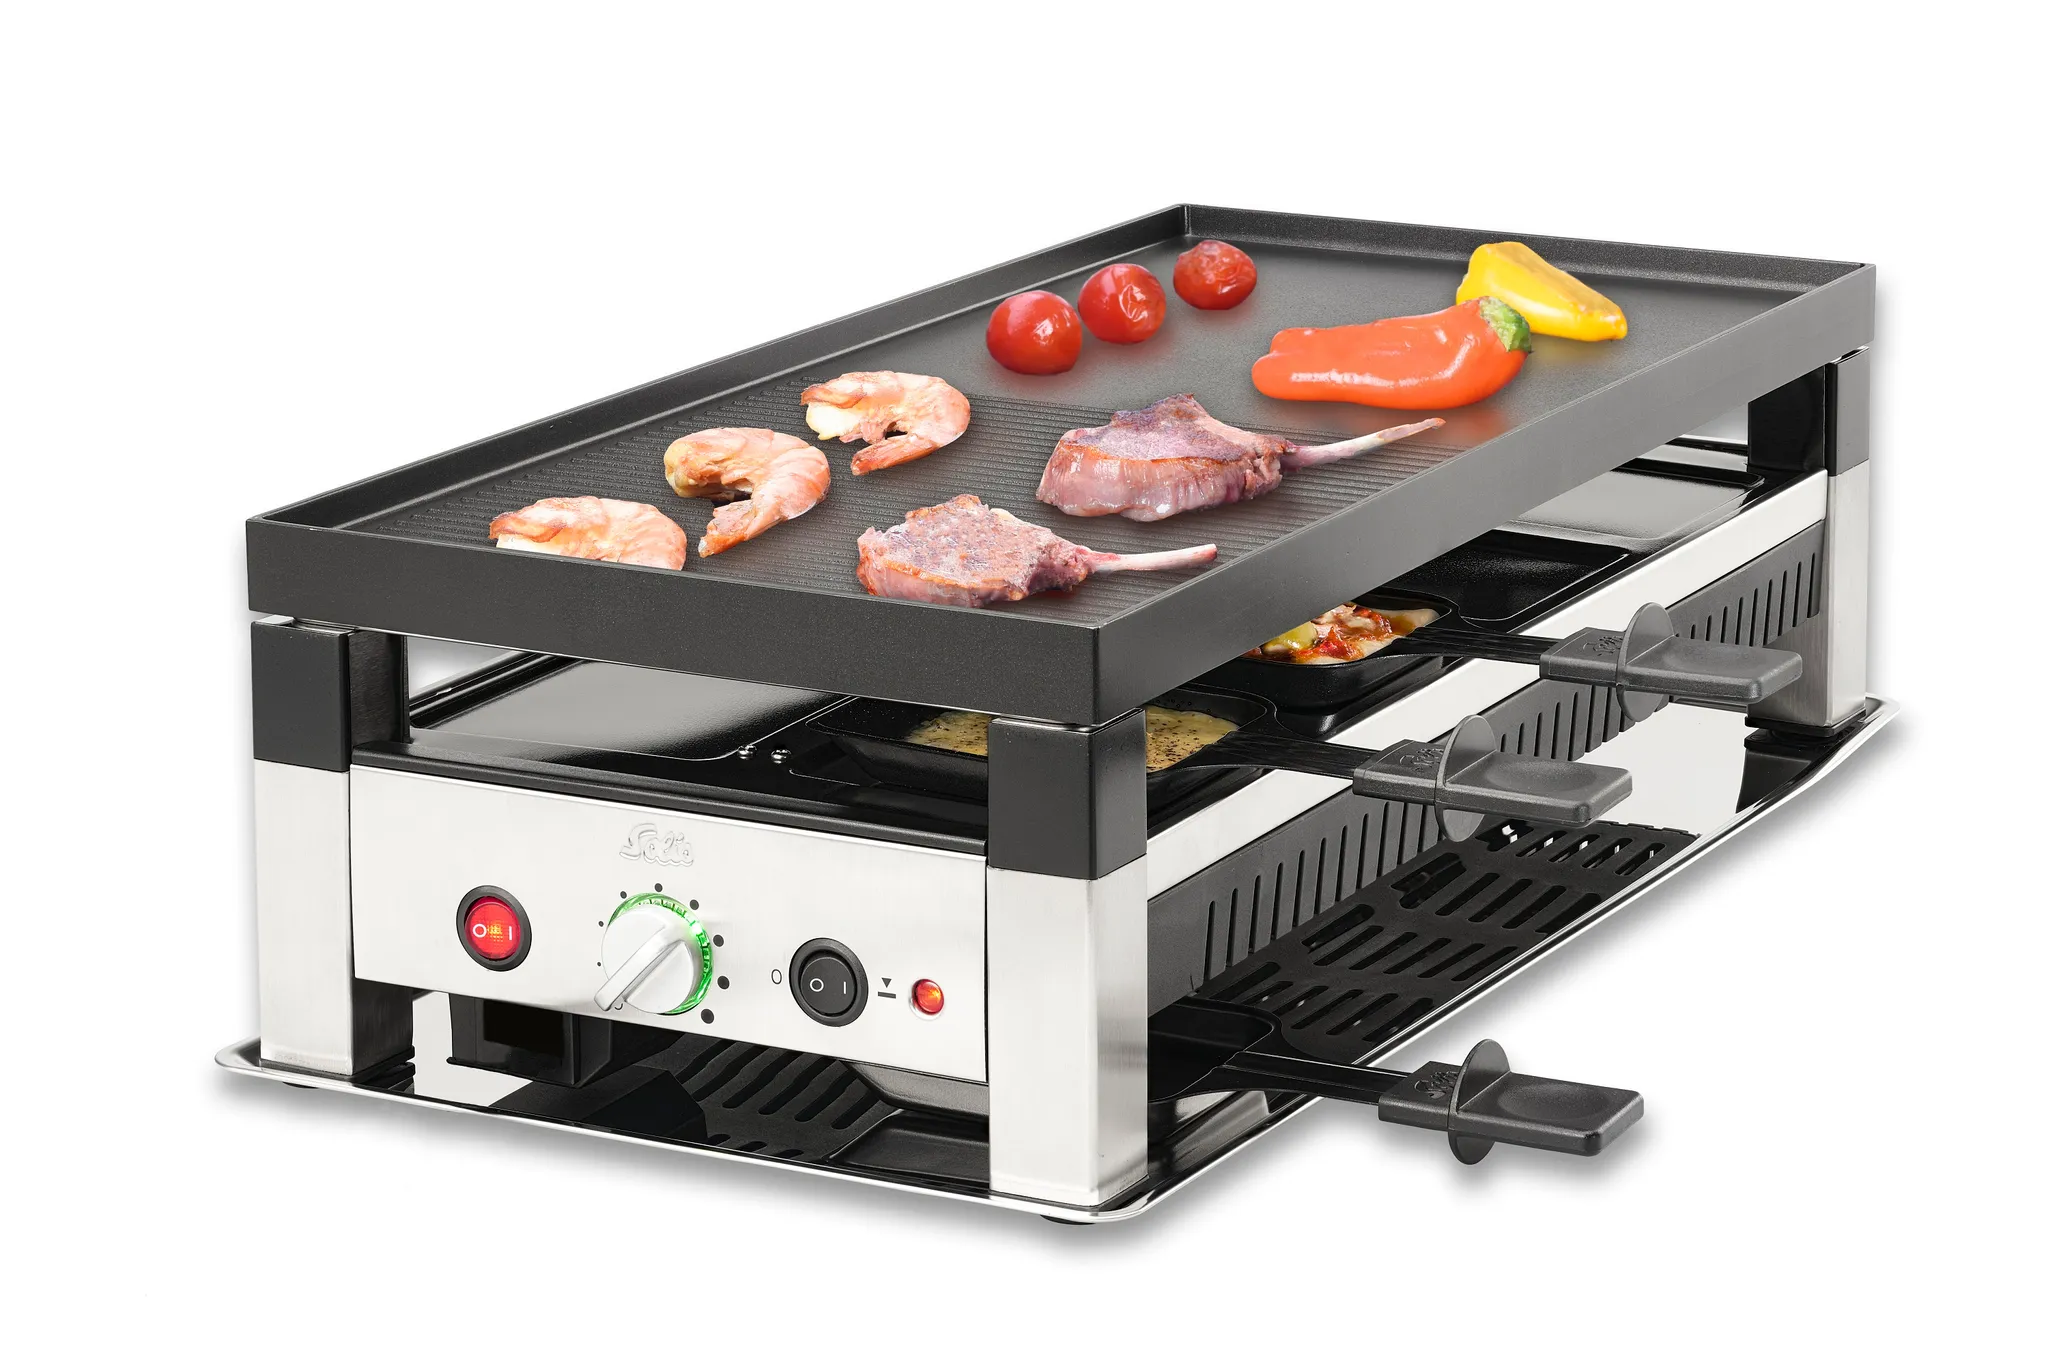 Solis 5 in 1 Table Raclette Grill Grill 791